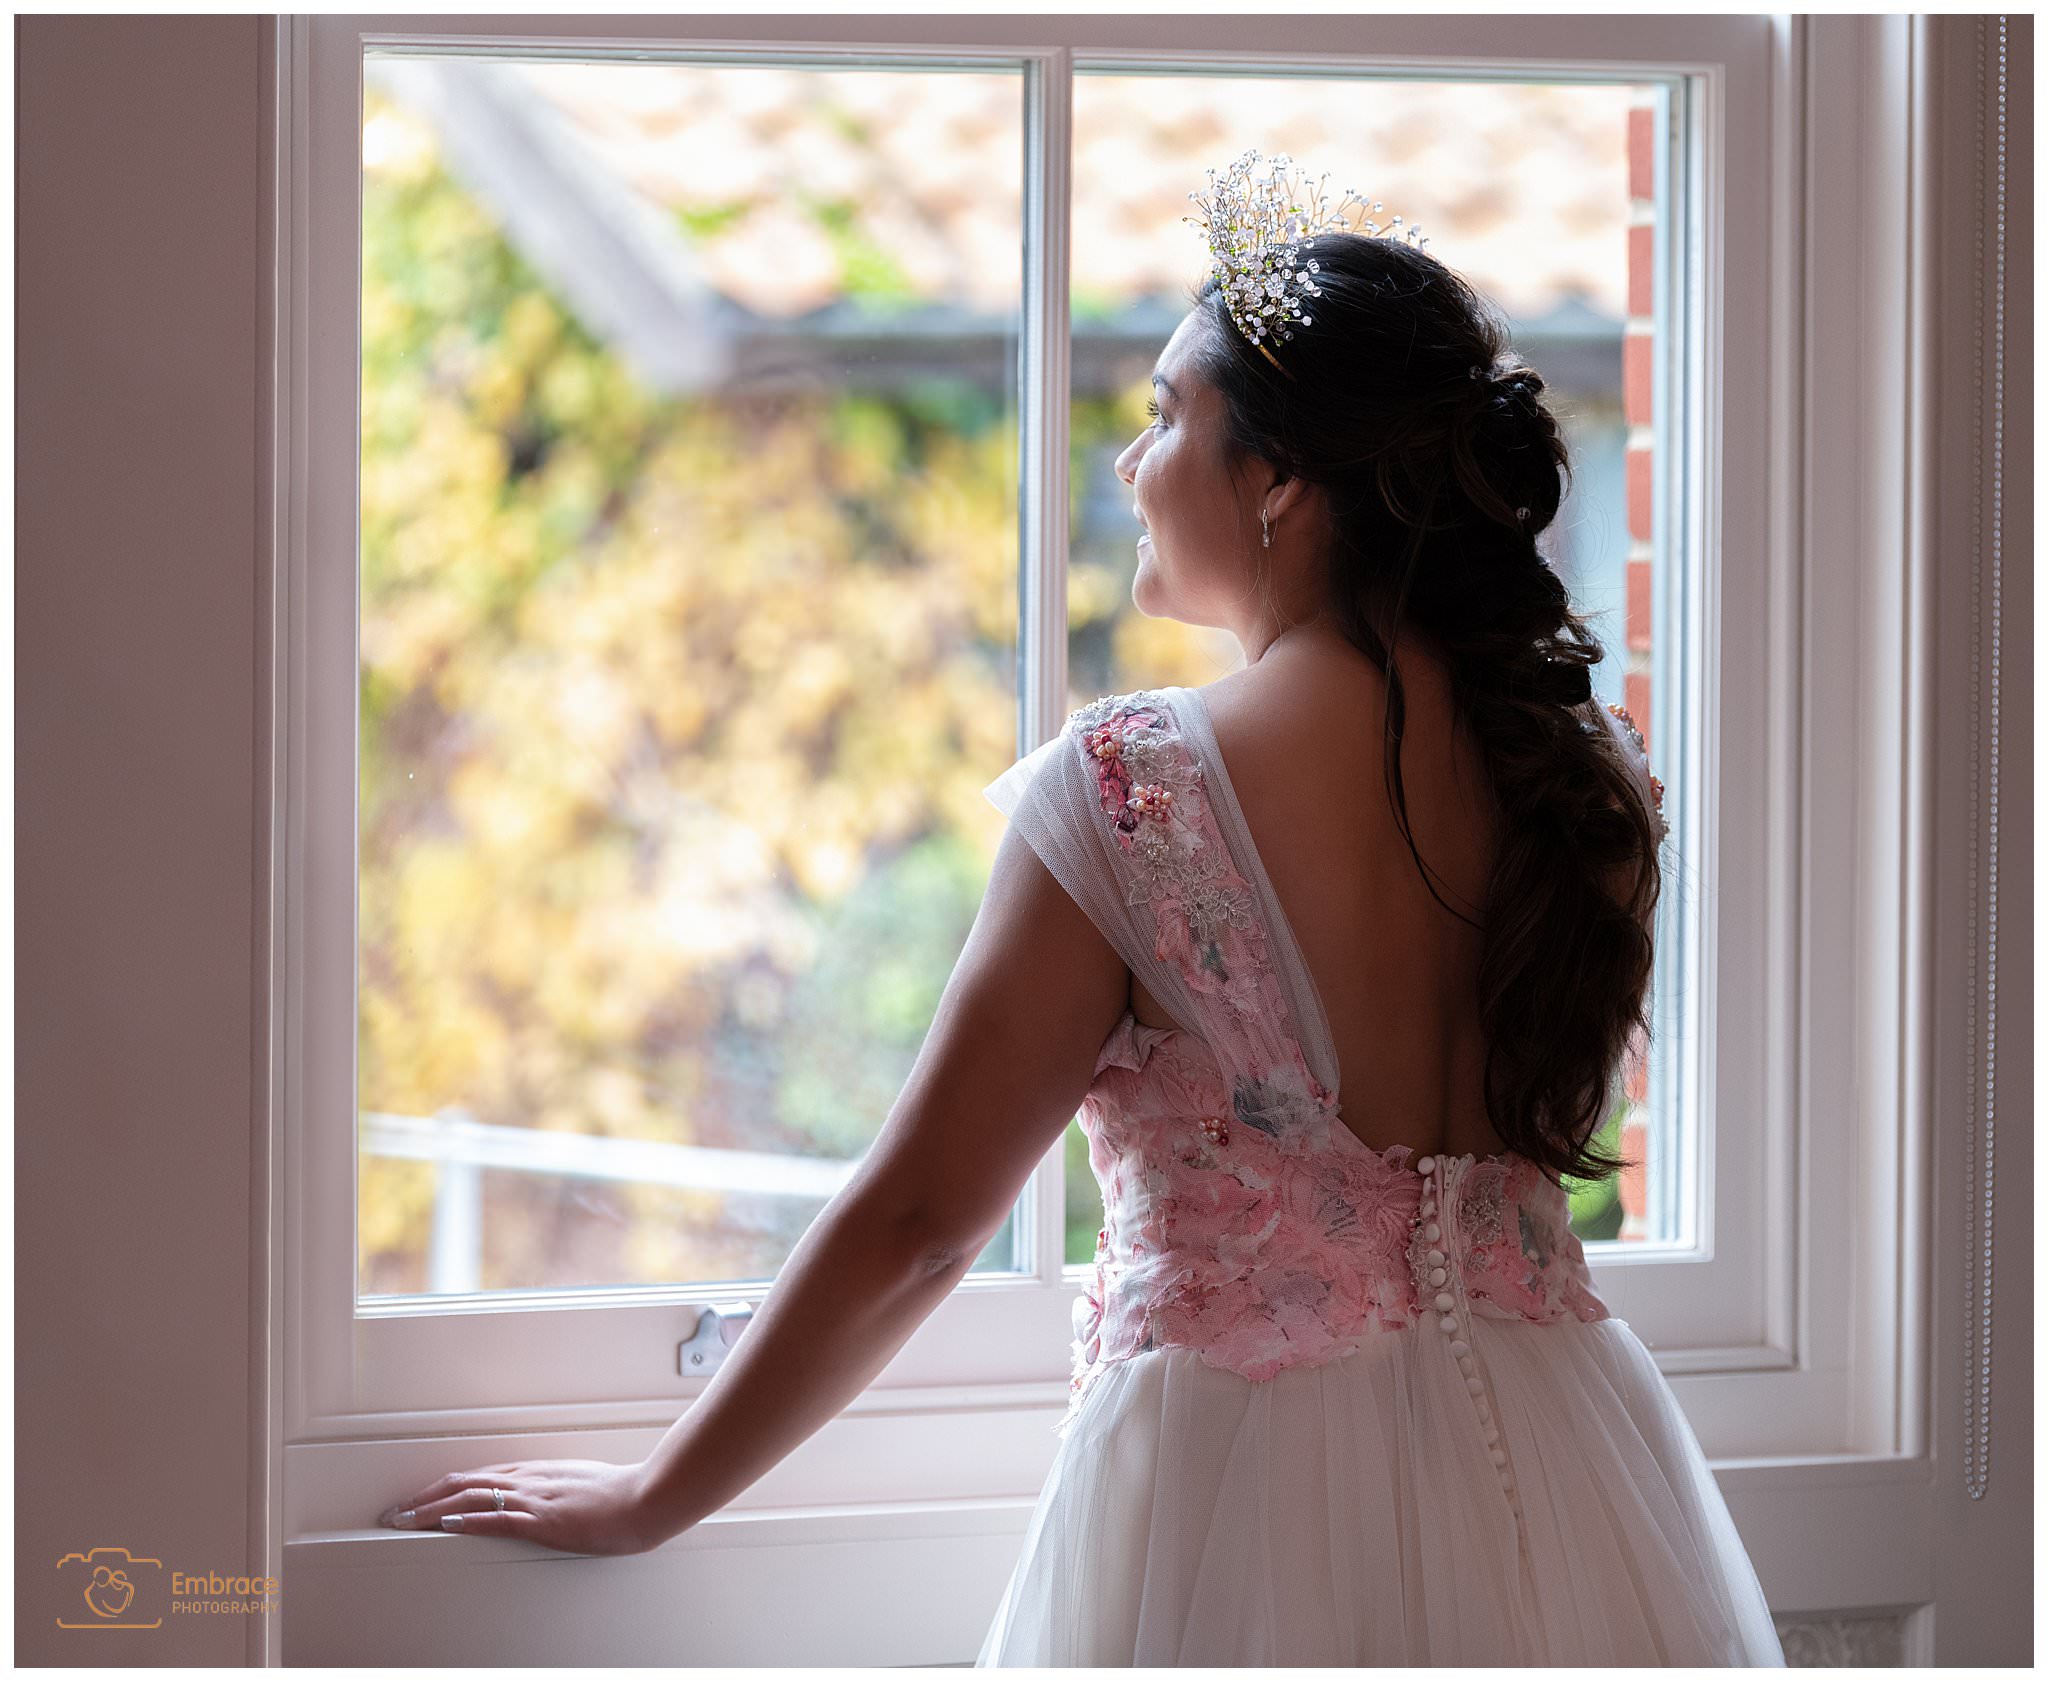 Melssa wearing a tiarra for wedding portrait with natural window light